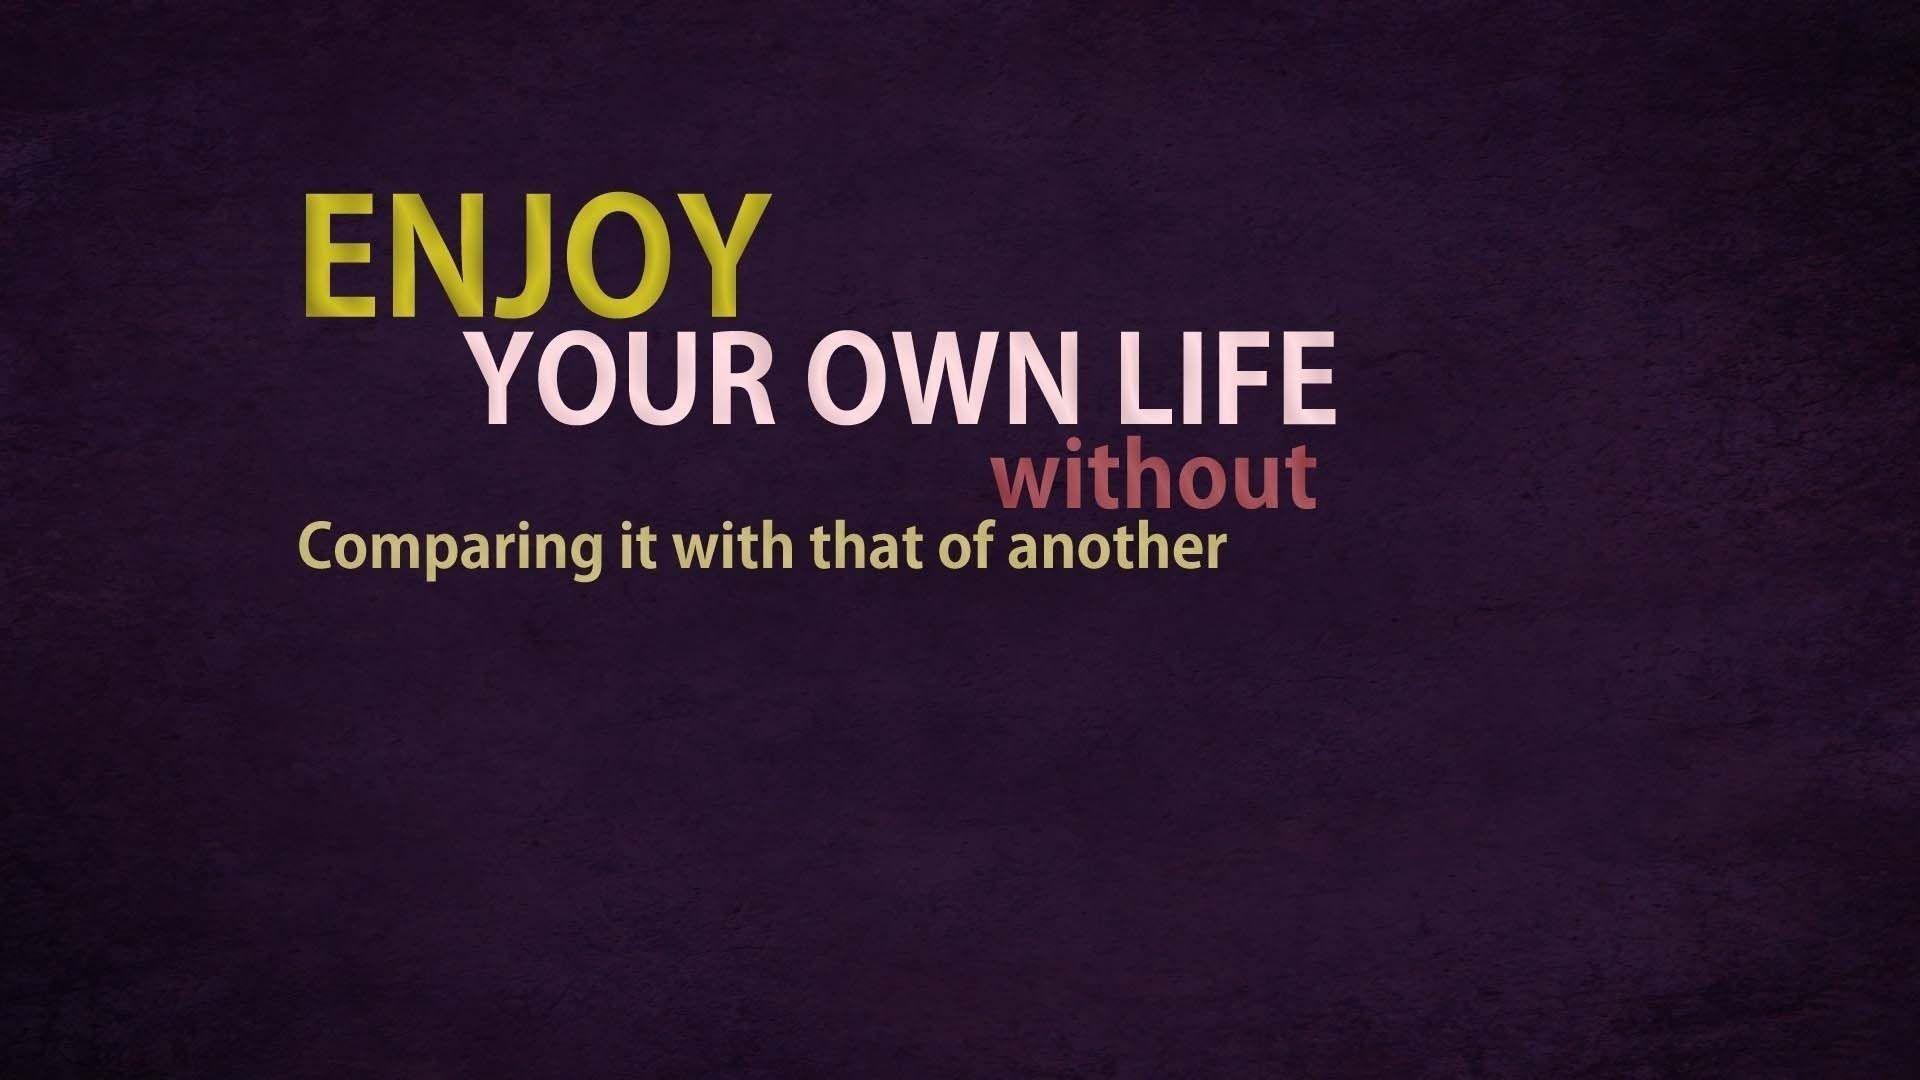 Inspirational Quote for Enjoy Life. HD Motivation Wallpaper